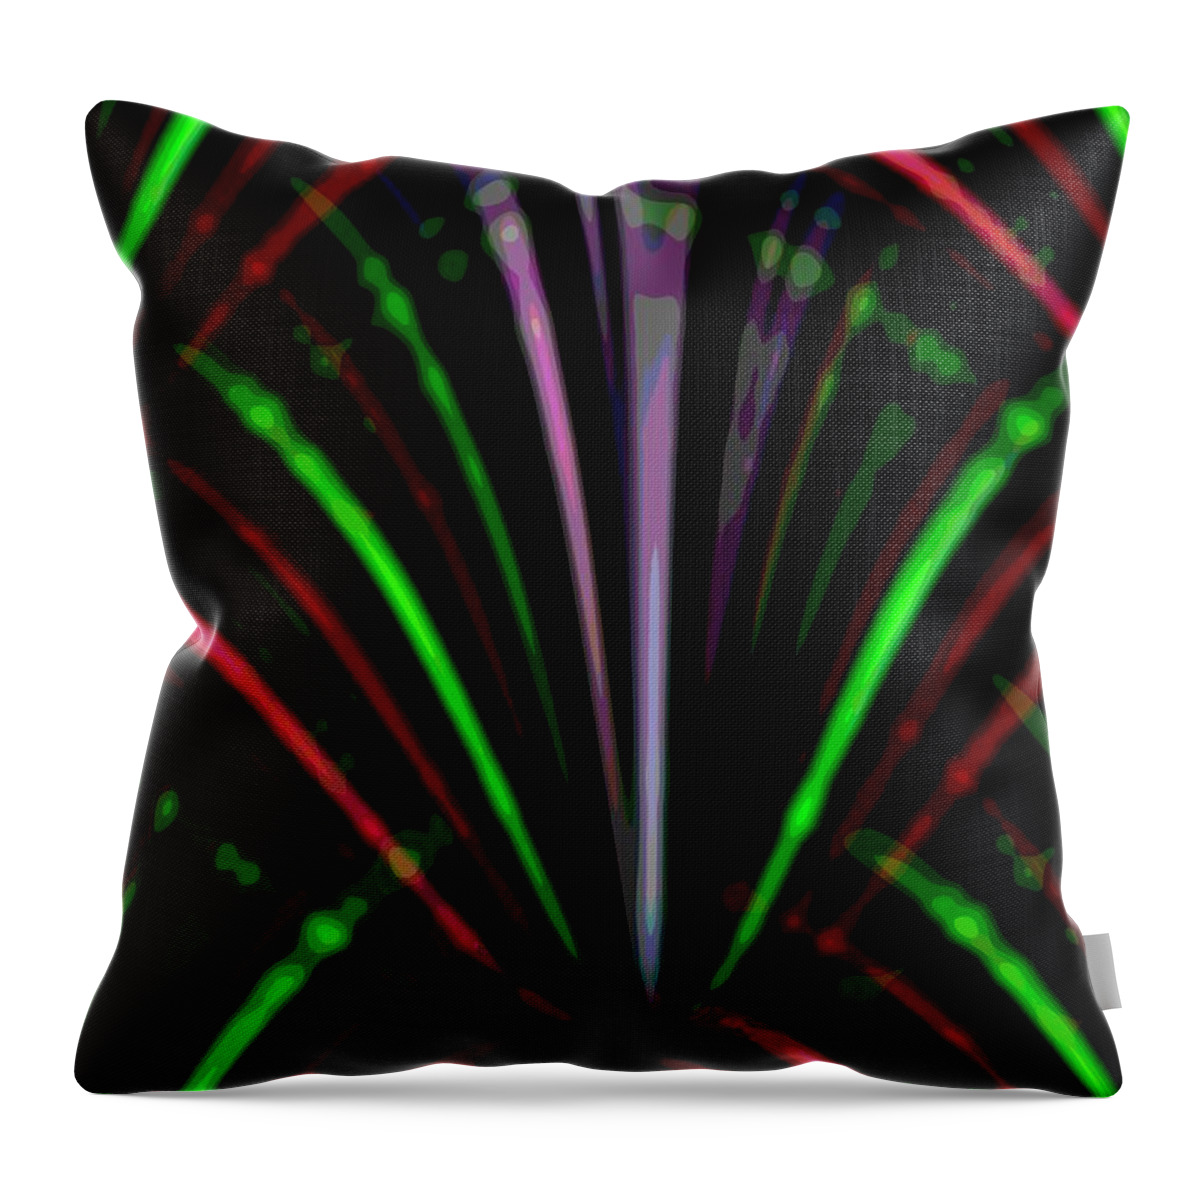 Marquee Throw Pillow featuring the digital art Marquee by Tim Allen